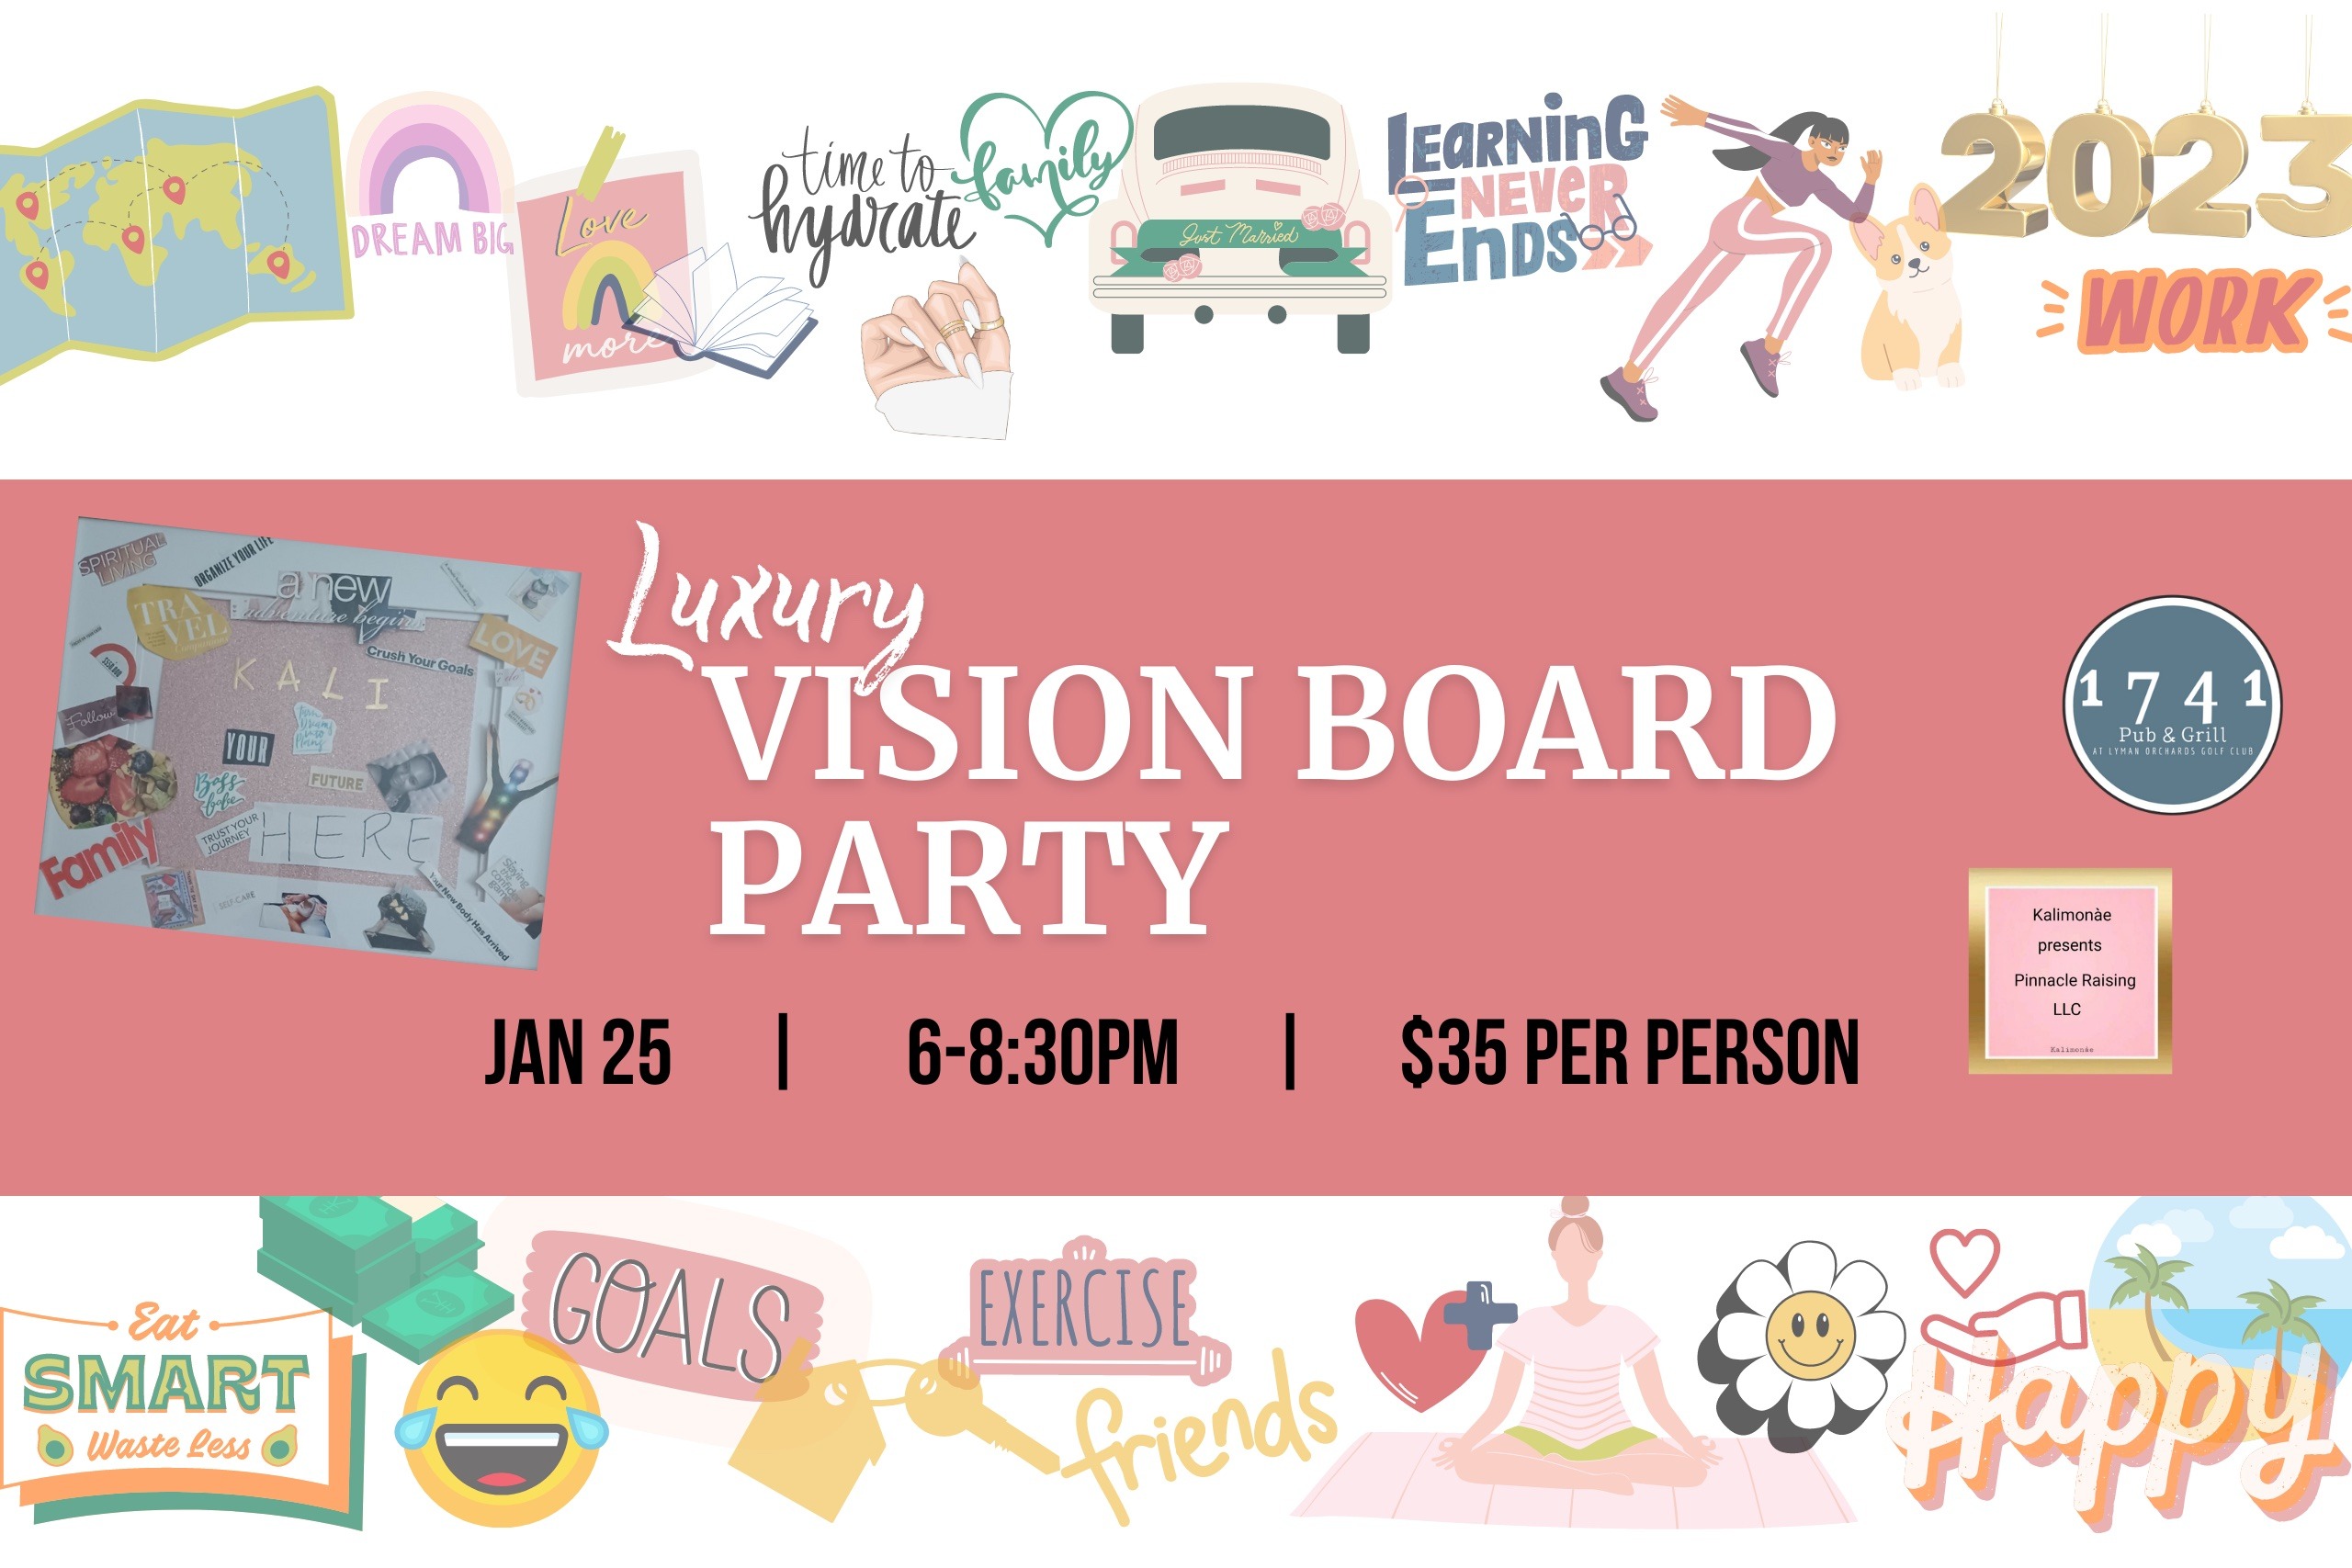 Luxury Vision Board Party at 1741 Pub & Grill | Lyman Orchards